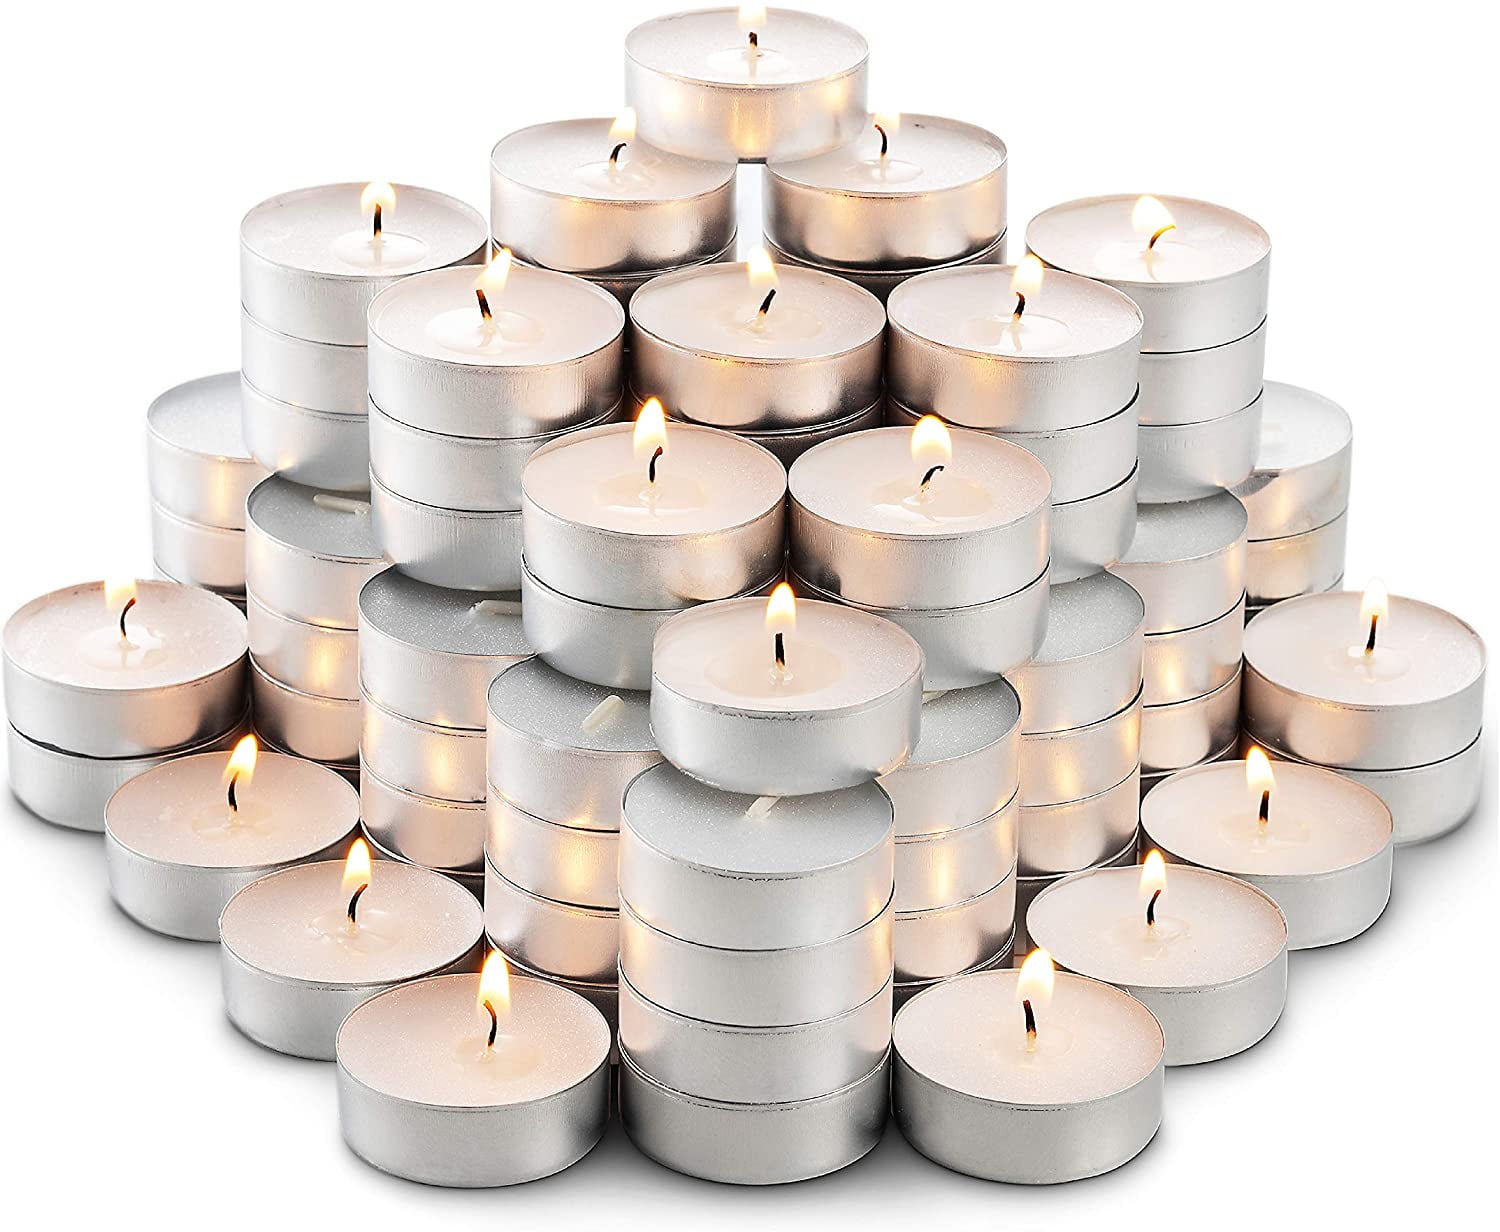 Ner Mitzvah Clear Cup Tea Light Candles White Unscented Travel 100 Bulk Pack 